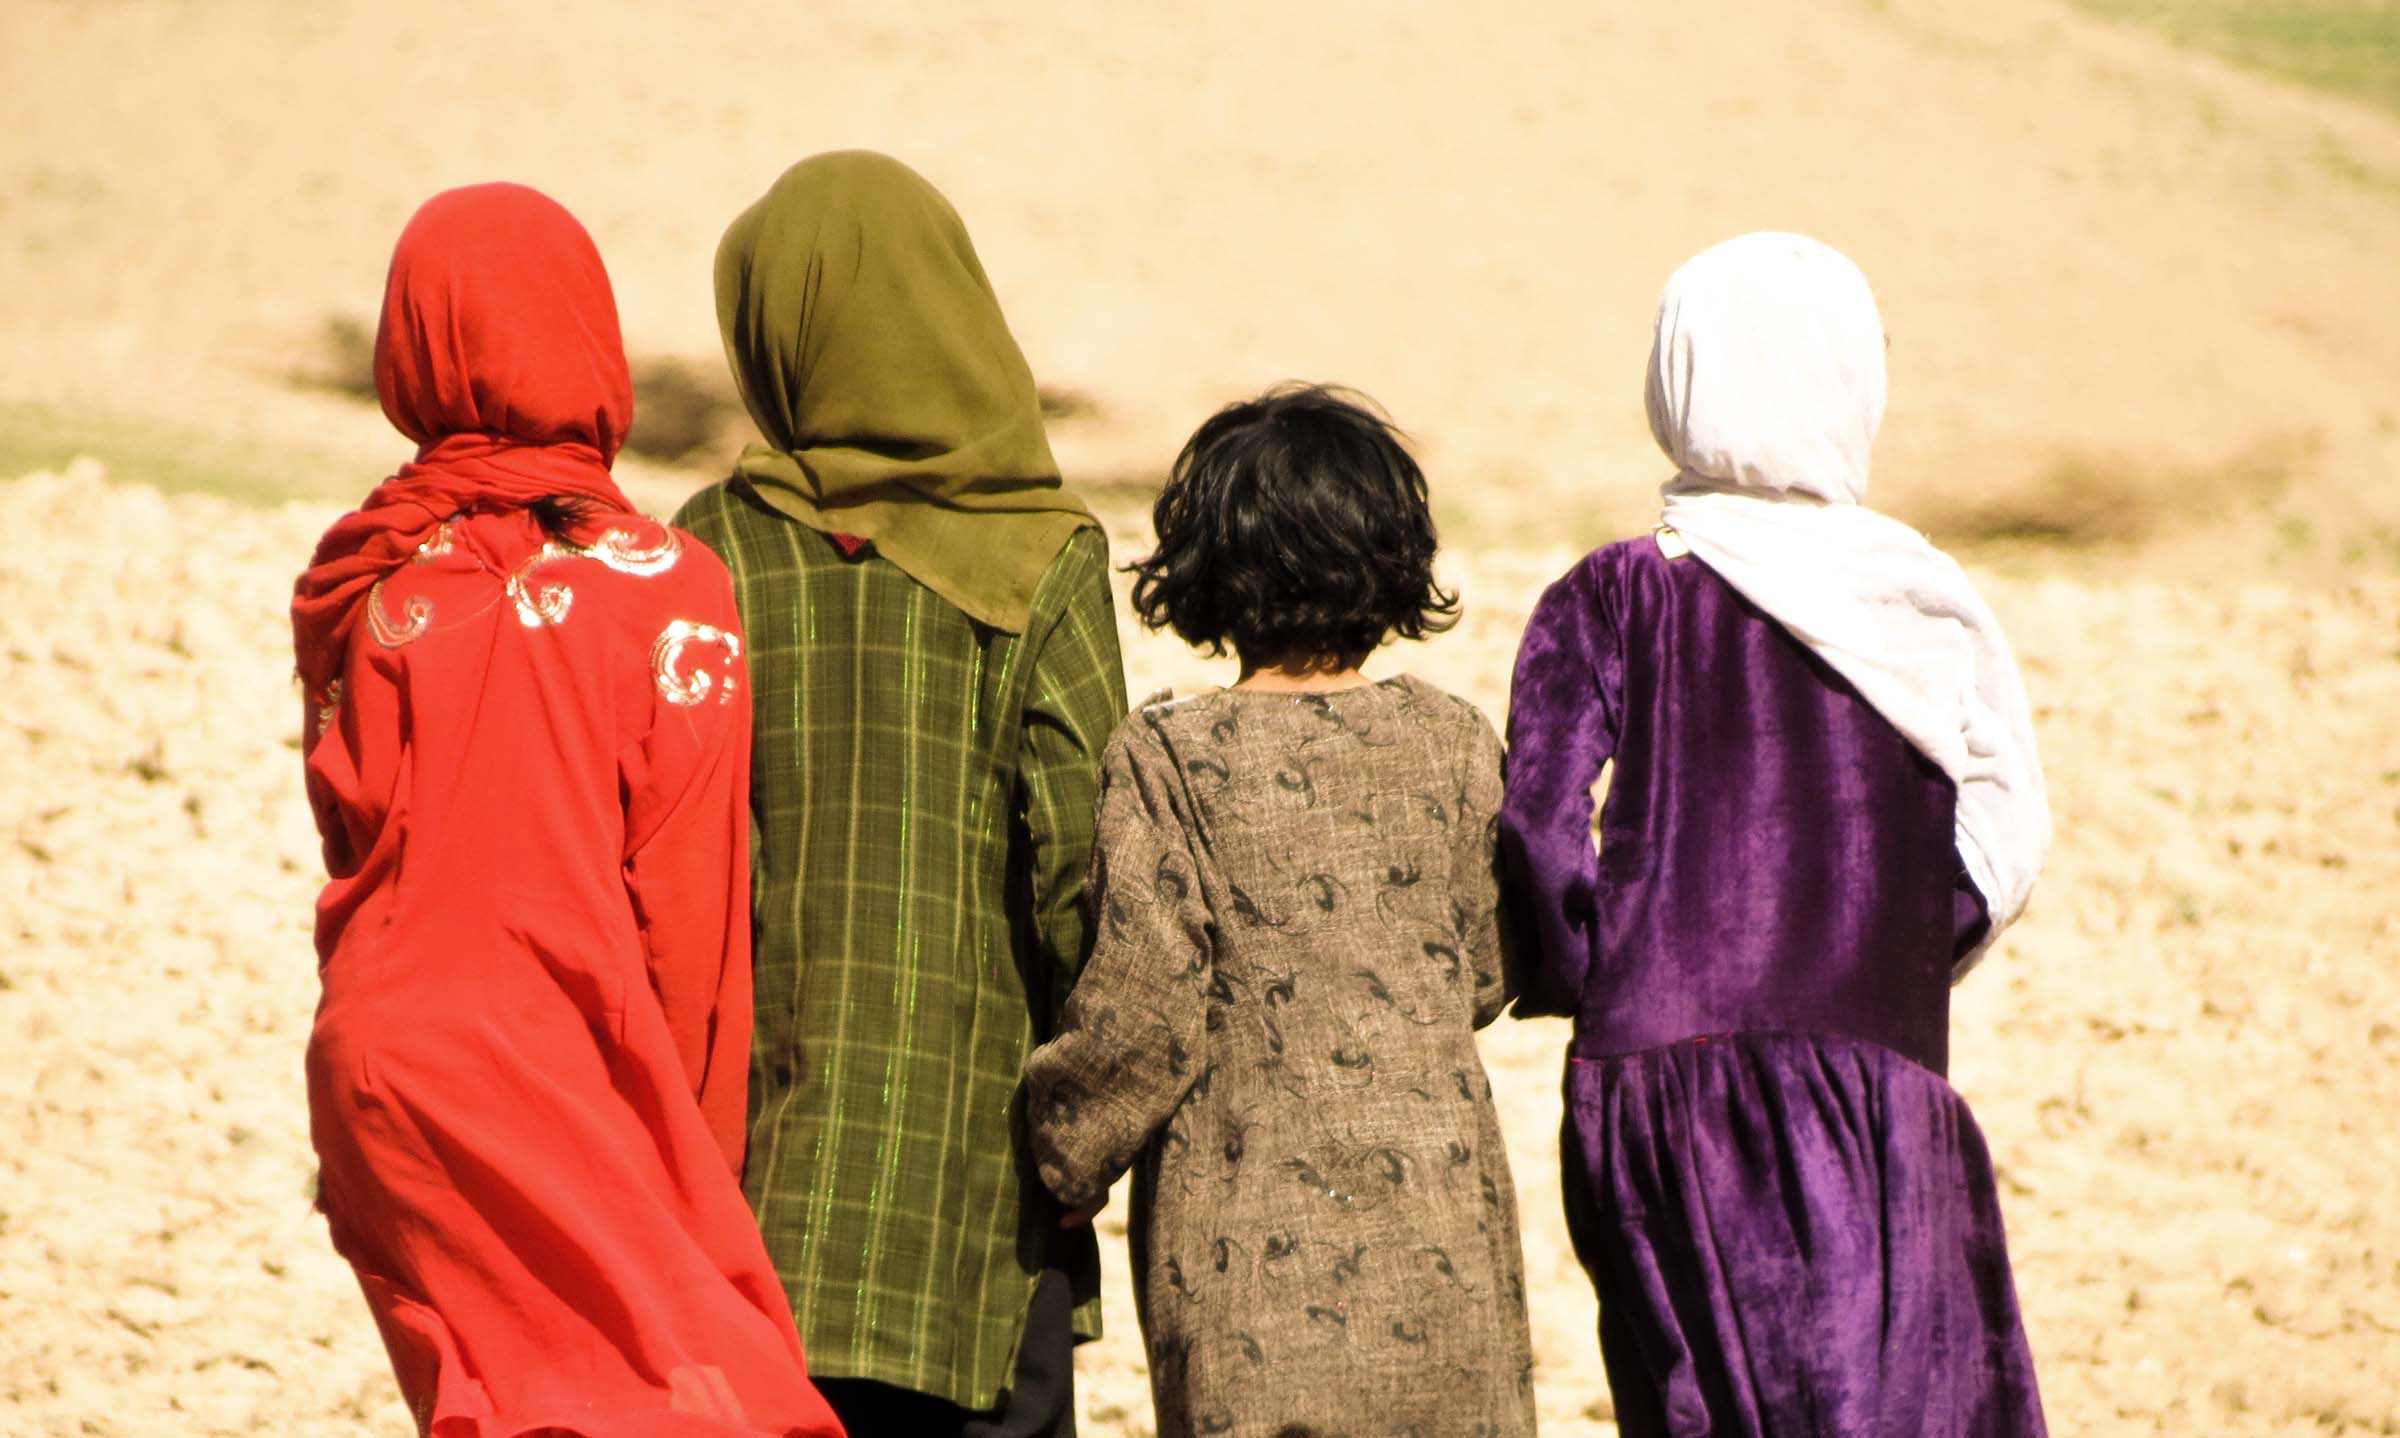 Four Afghan girls facing away from the camera